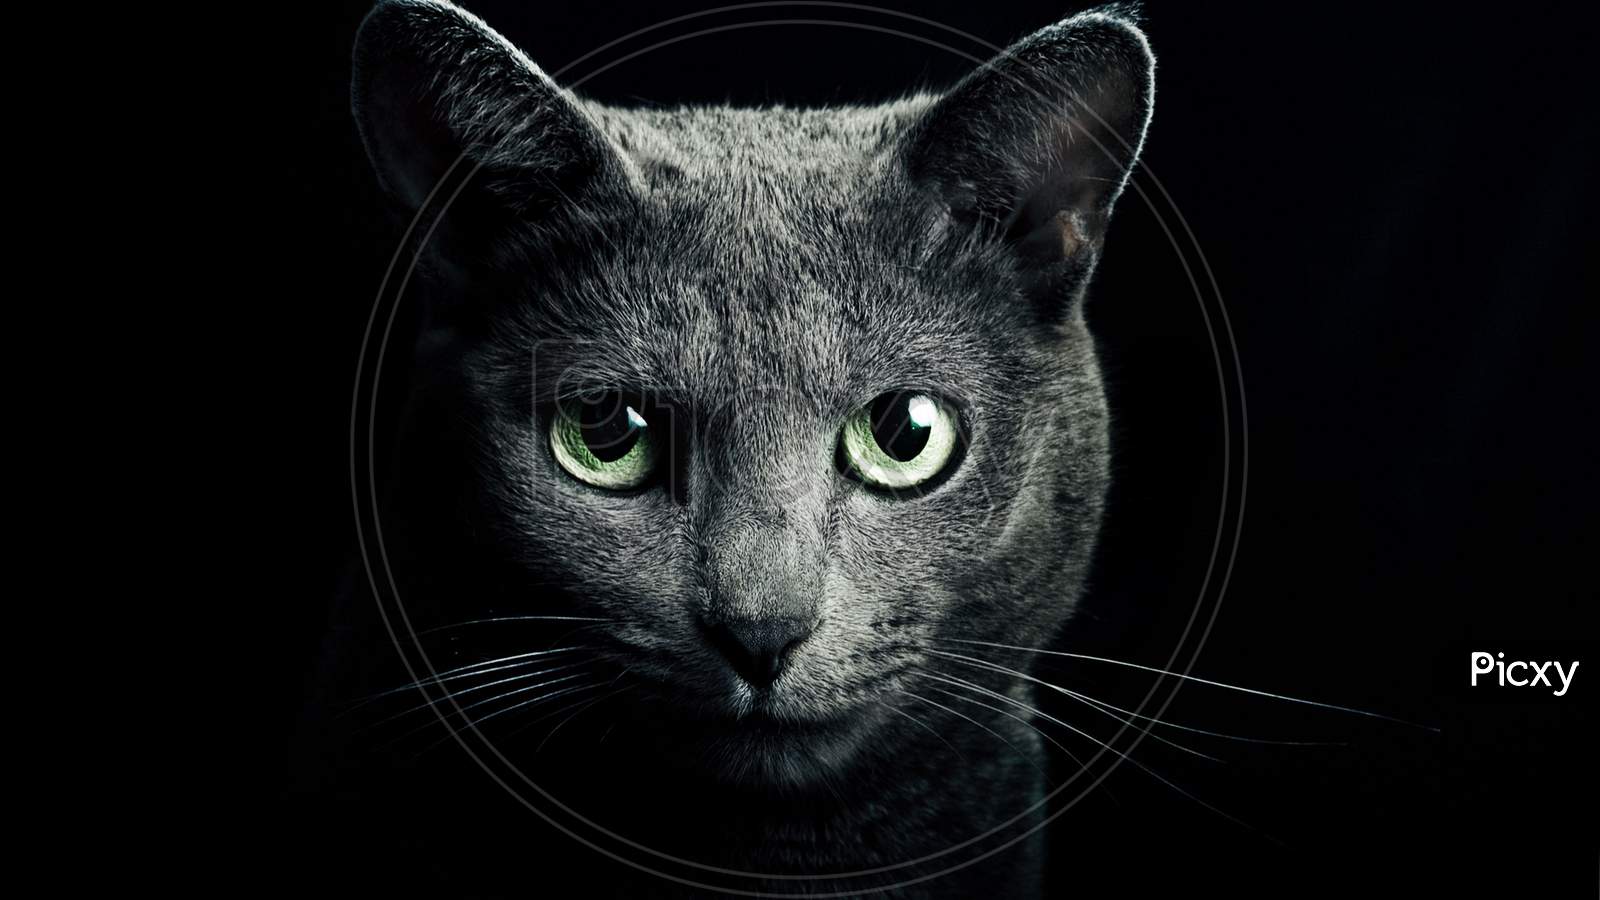 Close-Up Portrait Of A Cat With Light Green Eyes Against Black Background.